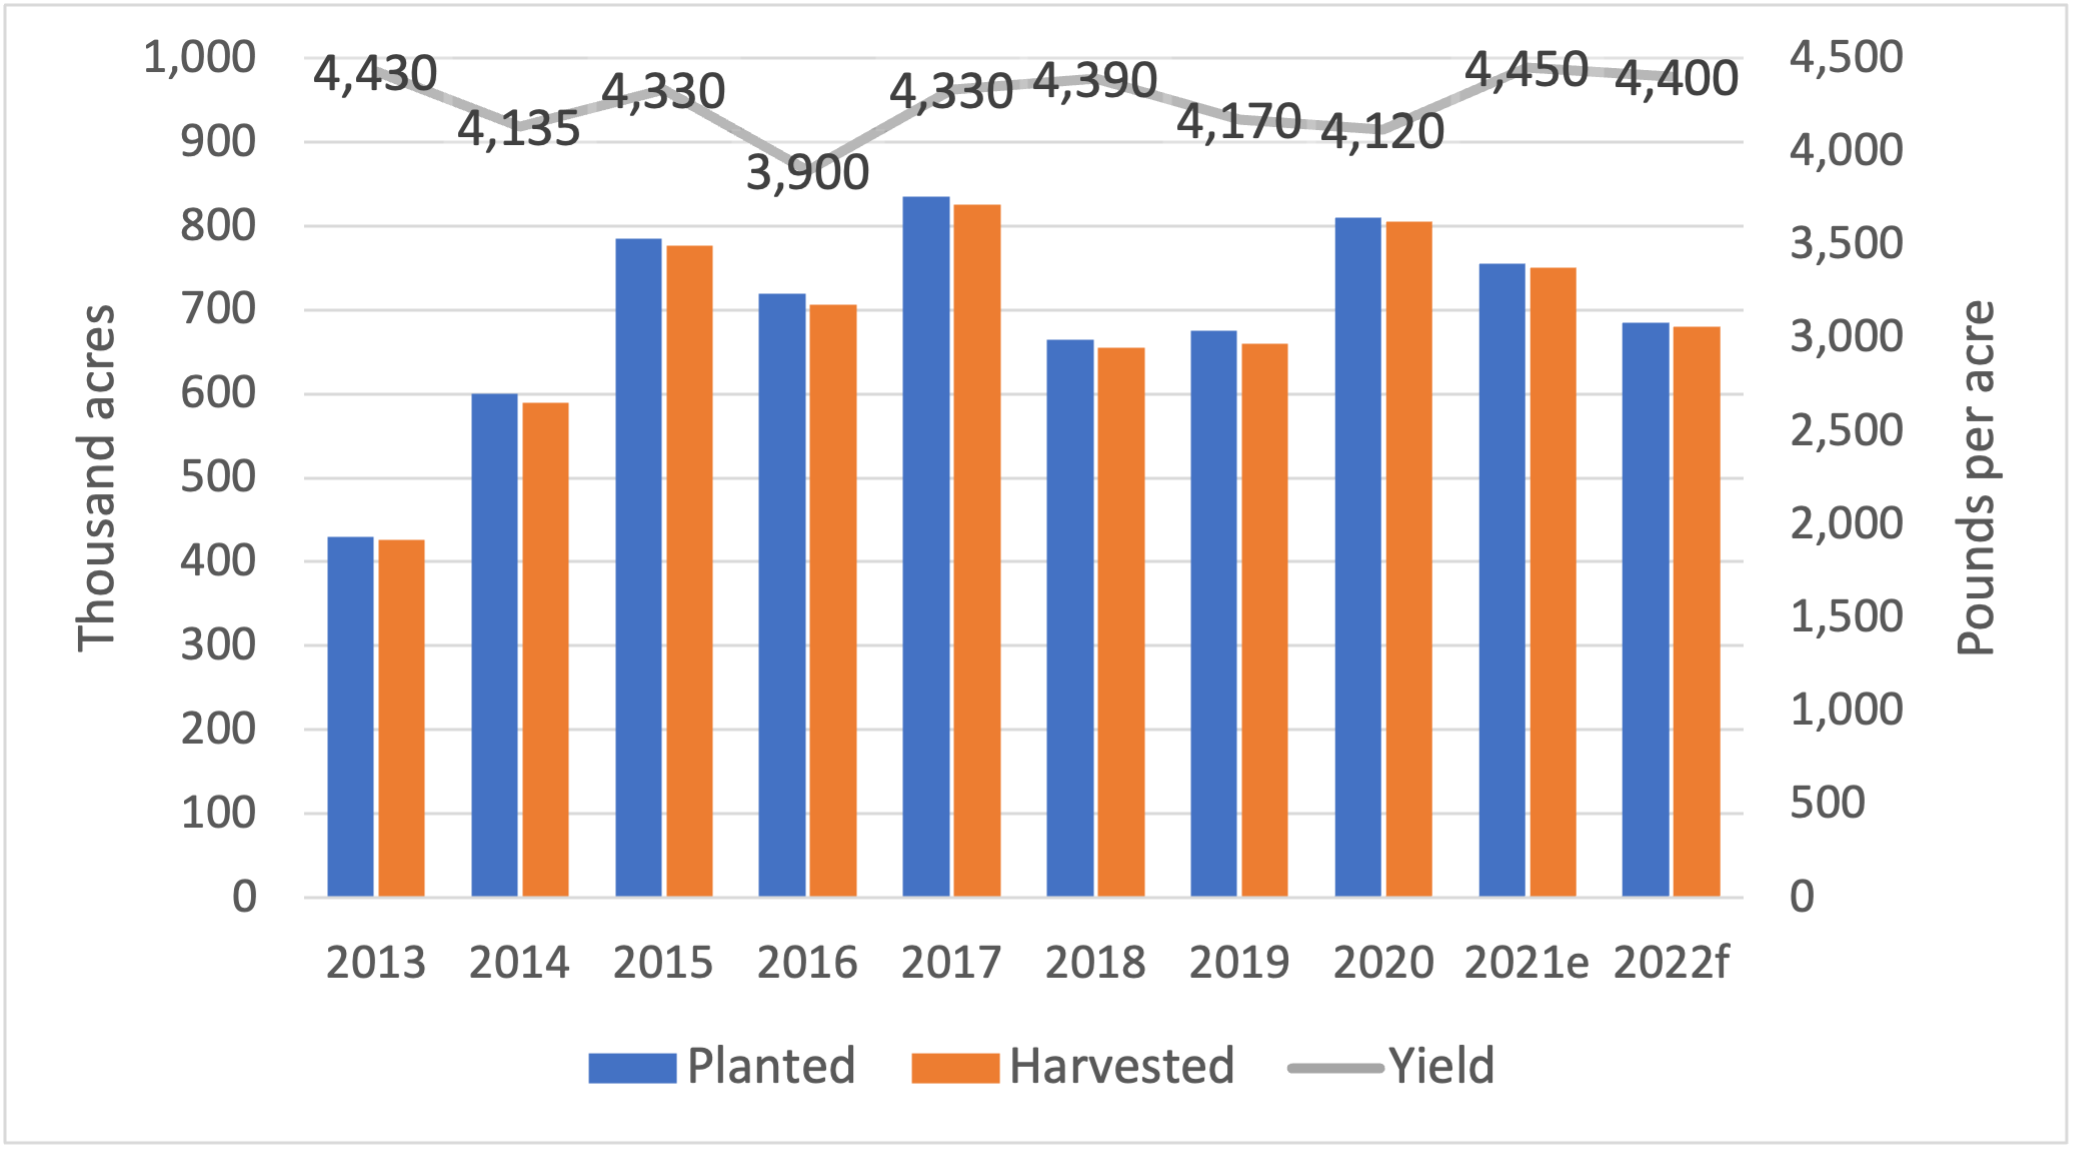 The forecast for Georgia's peanut harvest is 4400 pounds per acre, down slightly from 2021's anticipated 4450 pounds per acre. The anticipated planted acreage in Georgia is just under seven hundred thousand, down from 2021's seven hundred fifty thousand planted acres.